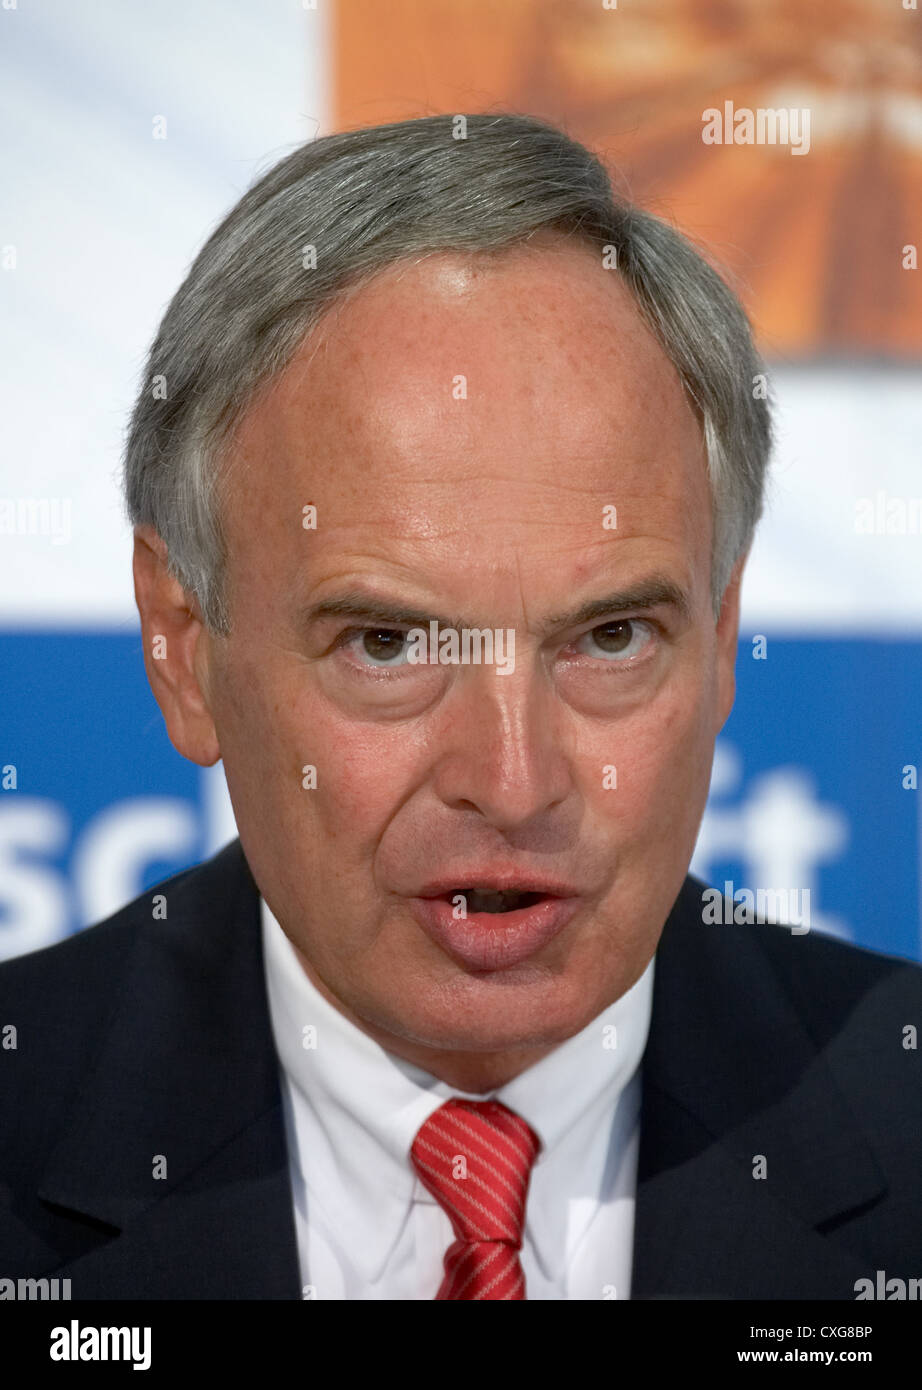 Hans-Peter Keitel, president of German Construction Industry Federation Stock Photo